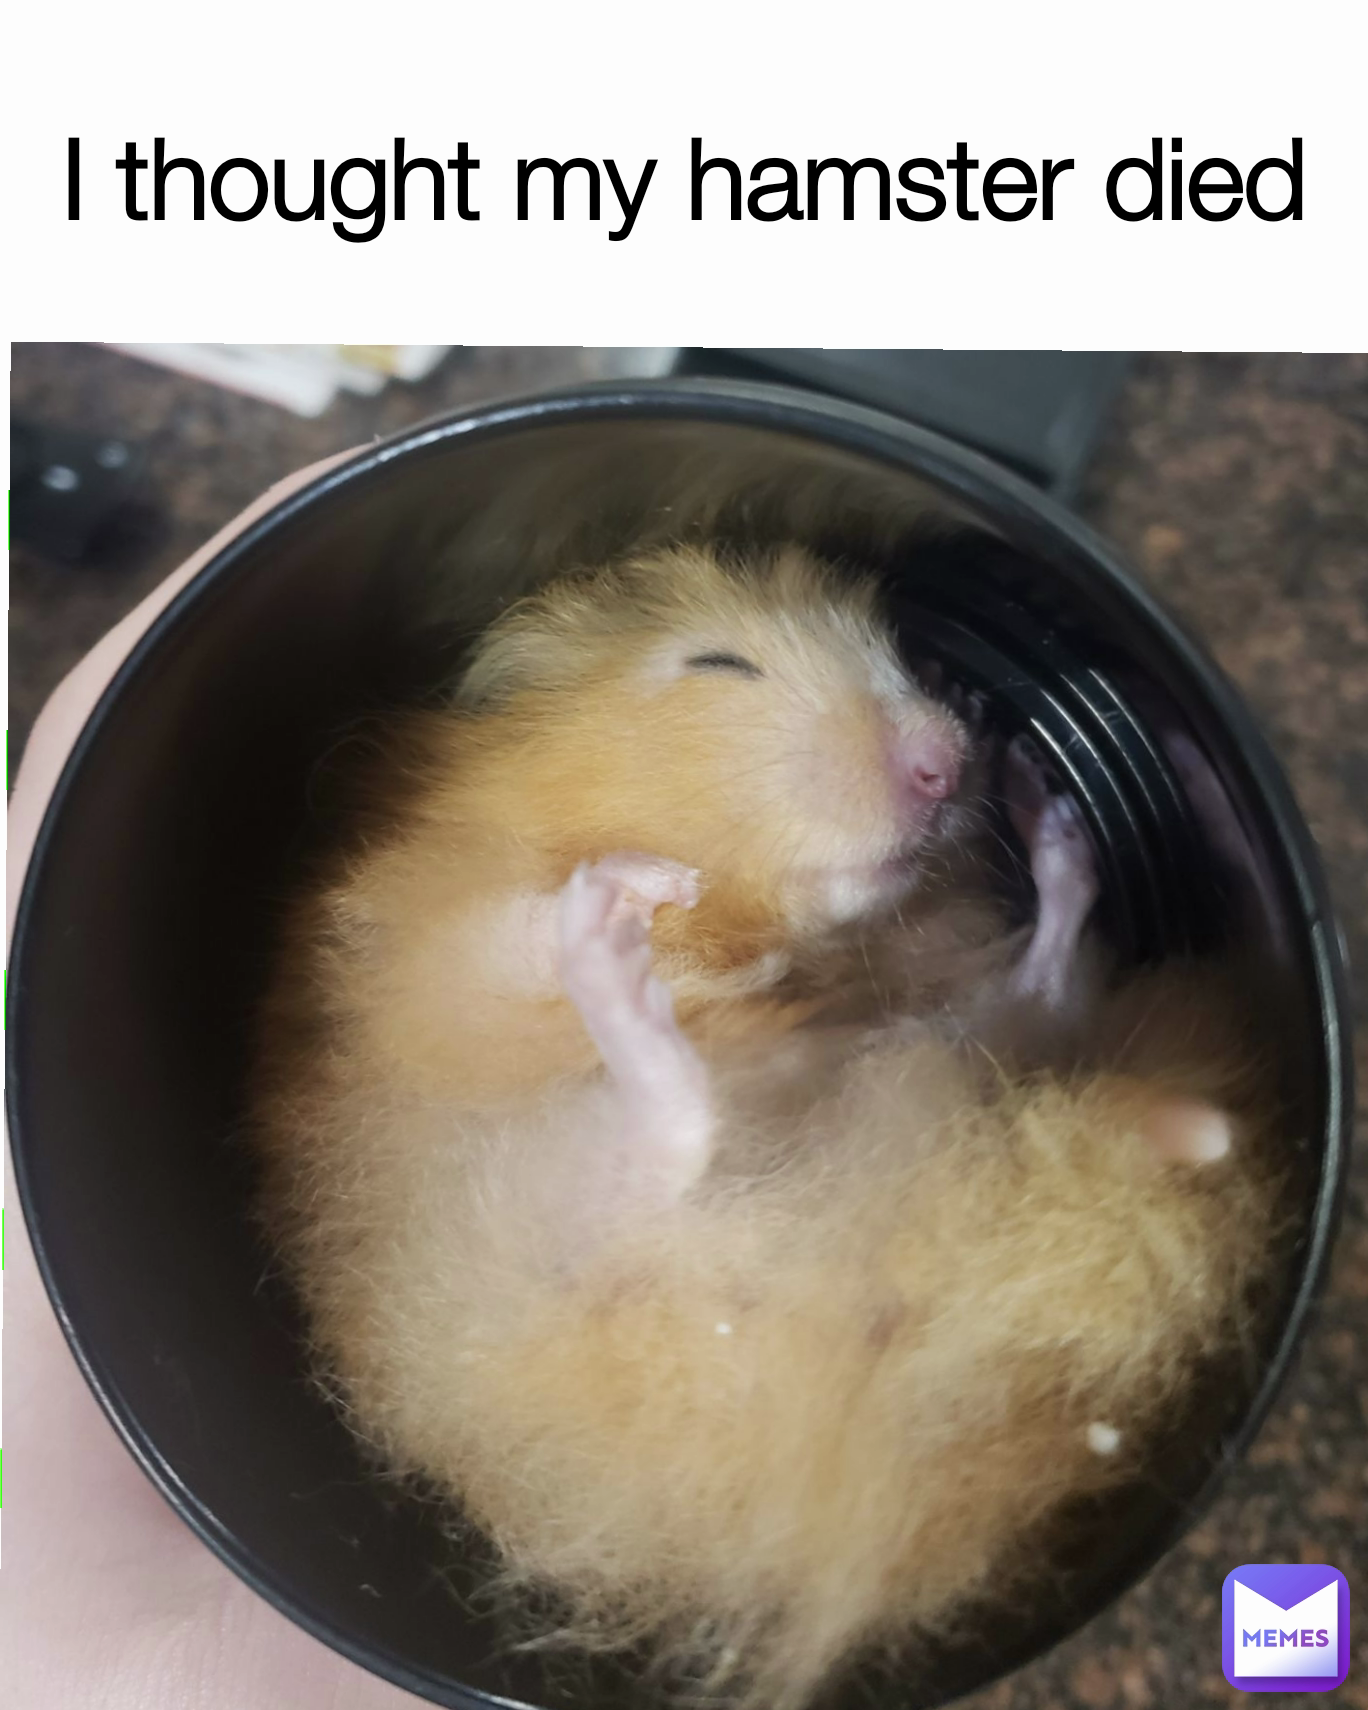 I thought my hamster died